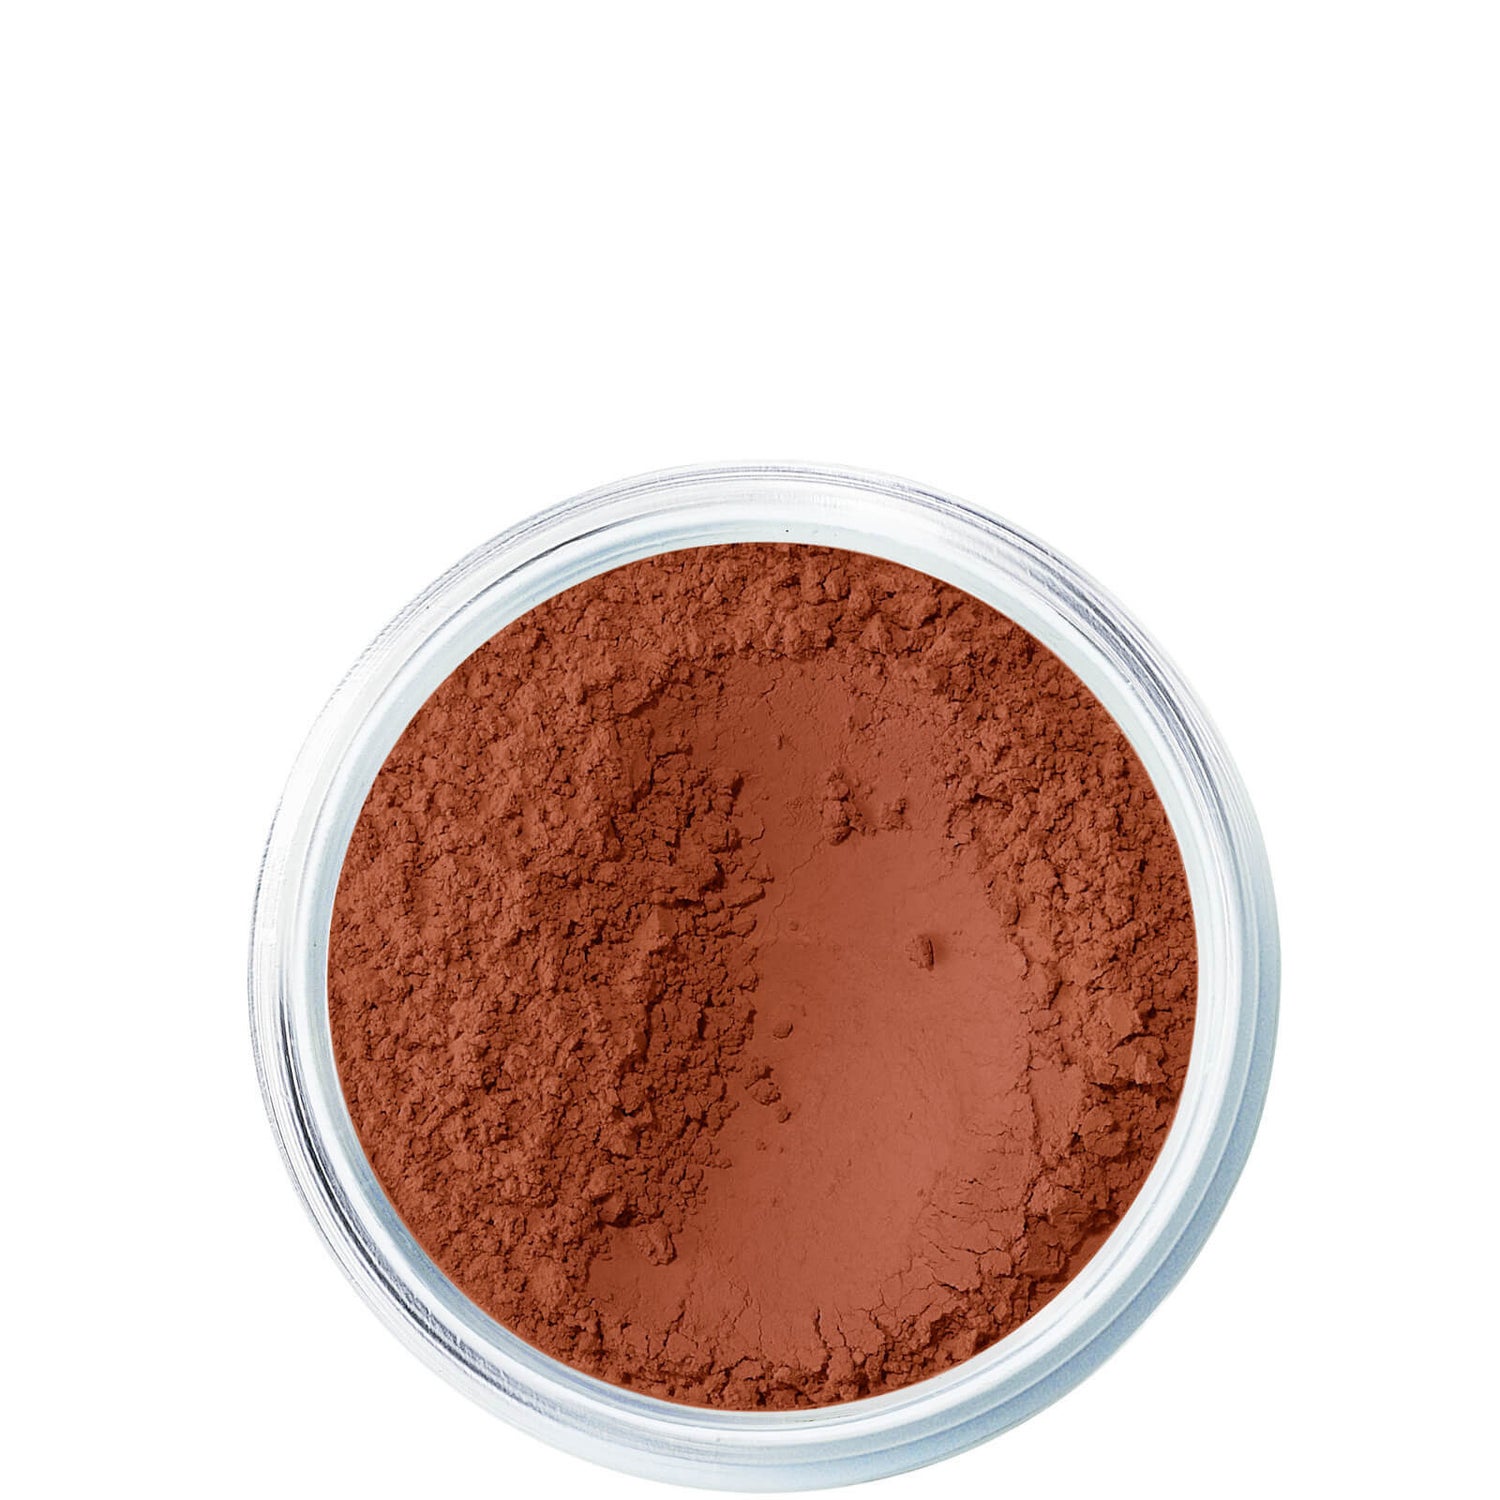 bareMinerals All Over Face Color - Warmth (1.5g)